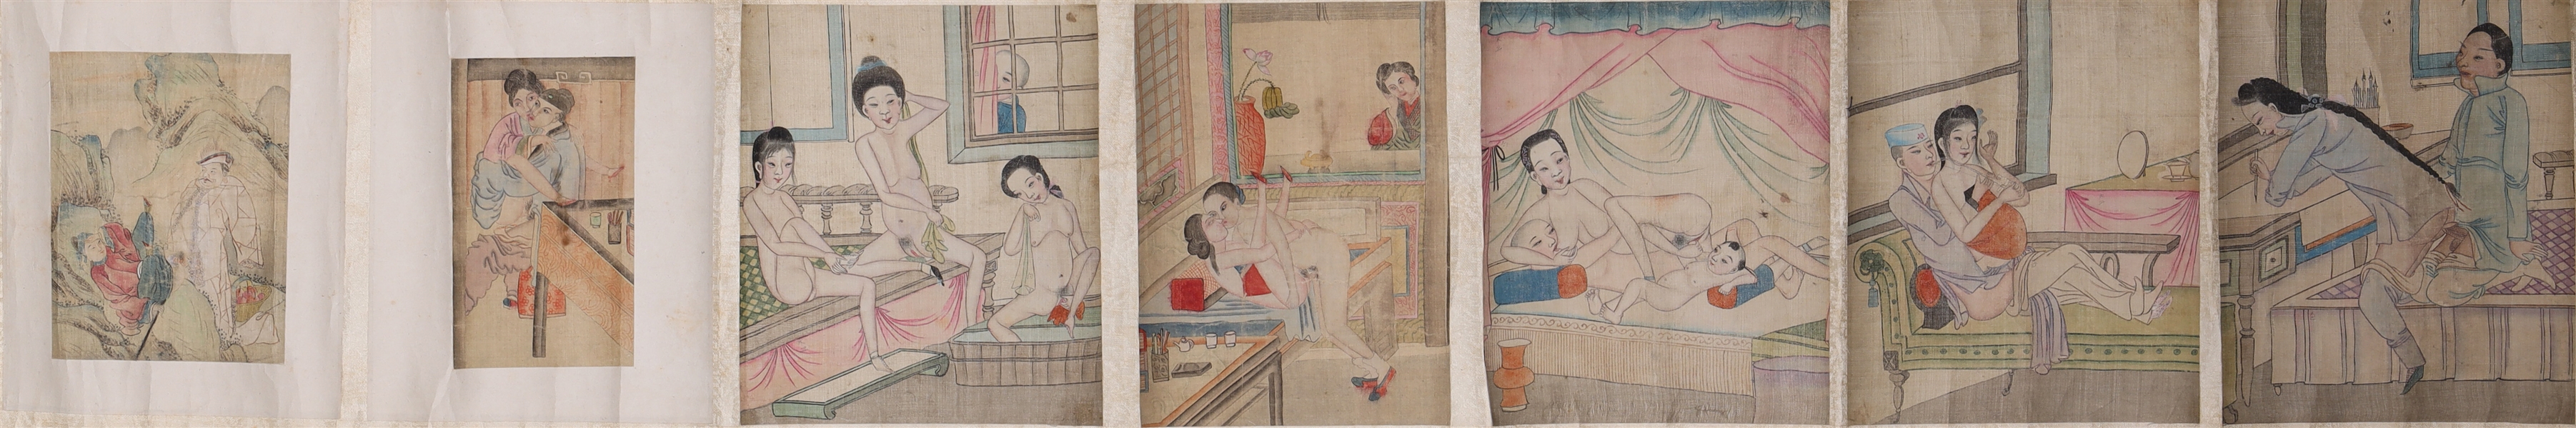 Old Japanese shunga hand scroll with